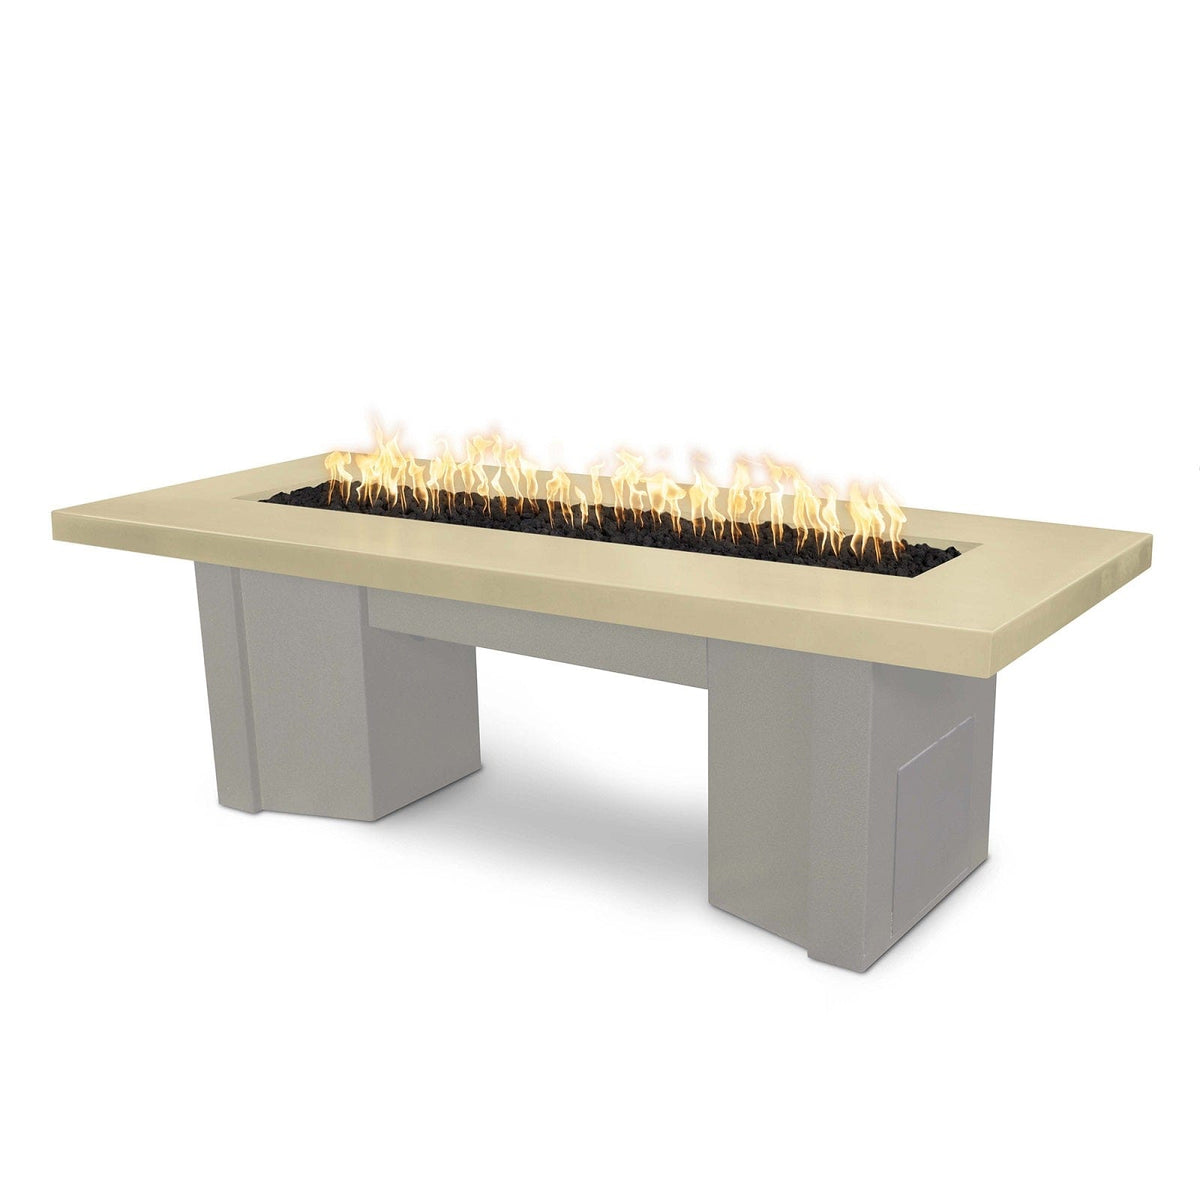 The Outdoor Plus Fire Features Vanilla (-VAN) / Pewter Powder Coated Steel (-PEW) The Outdoor Plus 60&quot; Alameda Fire Table Smooth Concrete in Natural Gas - Flame Sense System with Push Button Spark Igniter / OPT-ALMGFRC60FSEN-NG